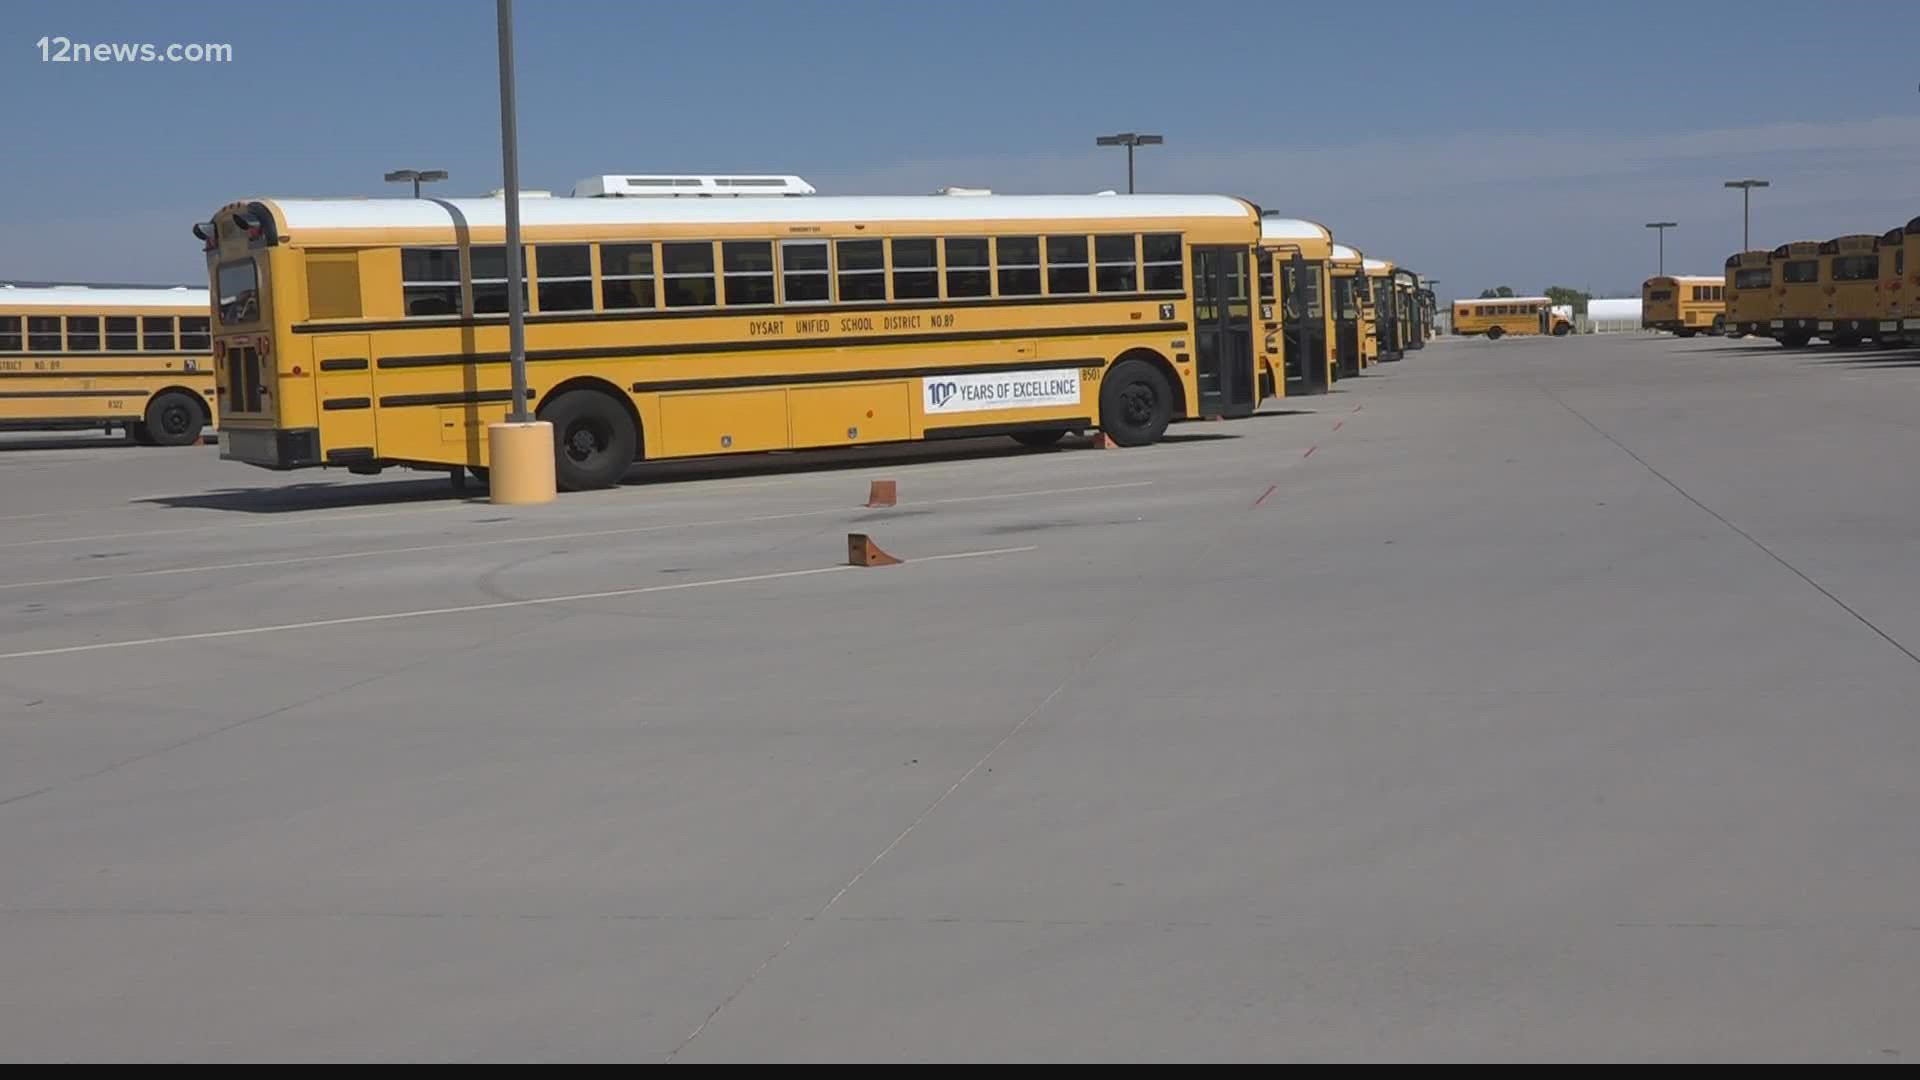 School districts across Arizona are struggling to fill bus driver positions. The Dysart Unified School District upped its starting pay and filled all its positions.